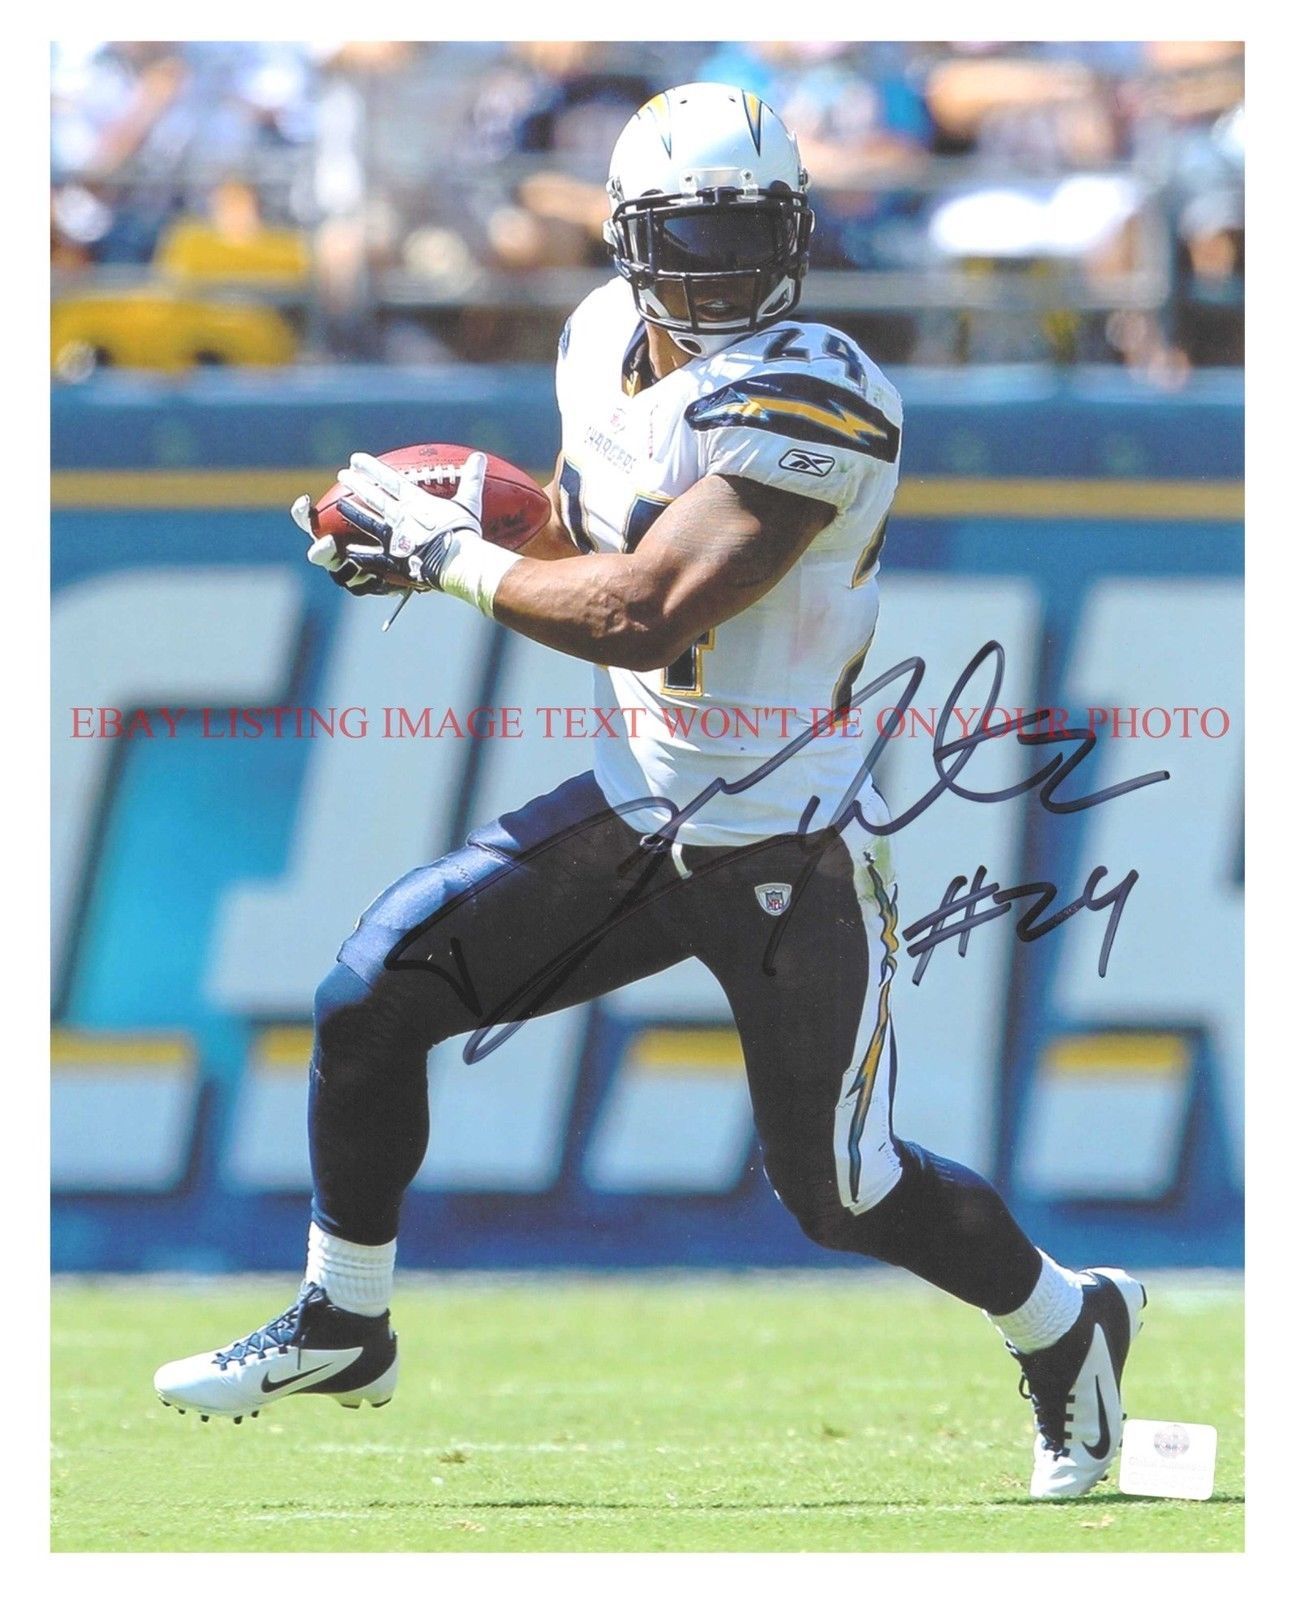 RYAN MATHEWS AUTO SIGNED AUTOGRAPHED 8x10 RP PHOTO SAN DIEGO CHARGERS - $14.57